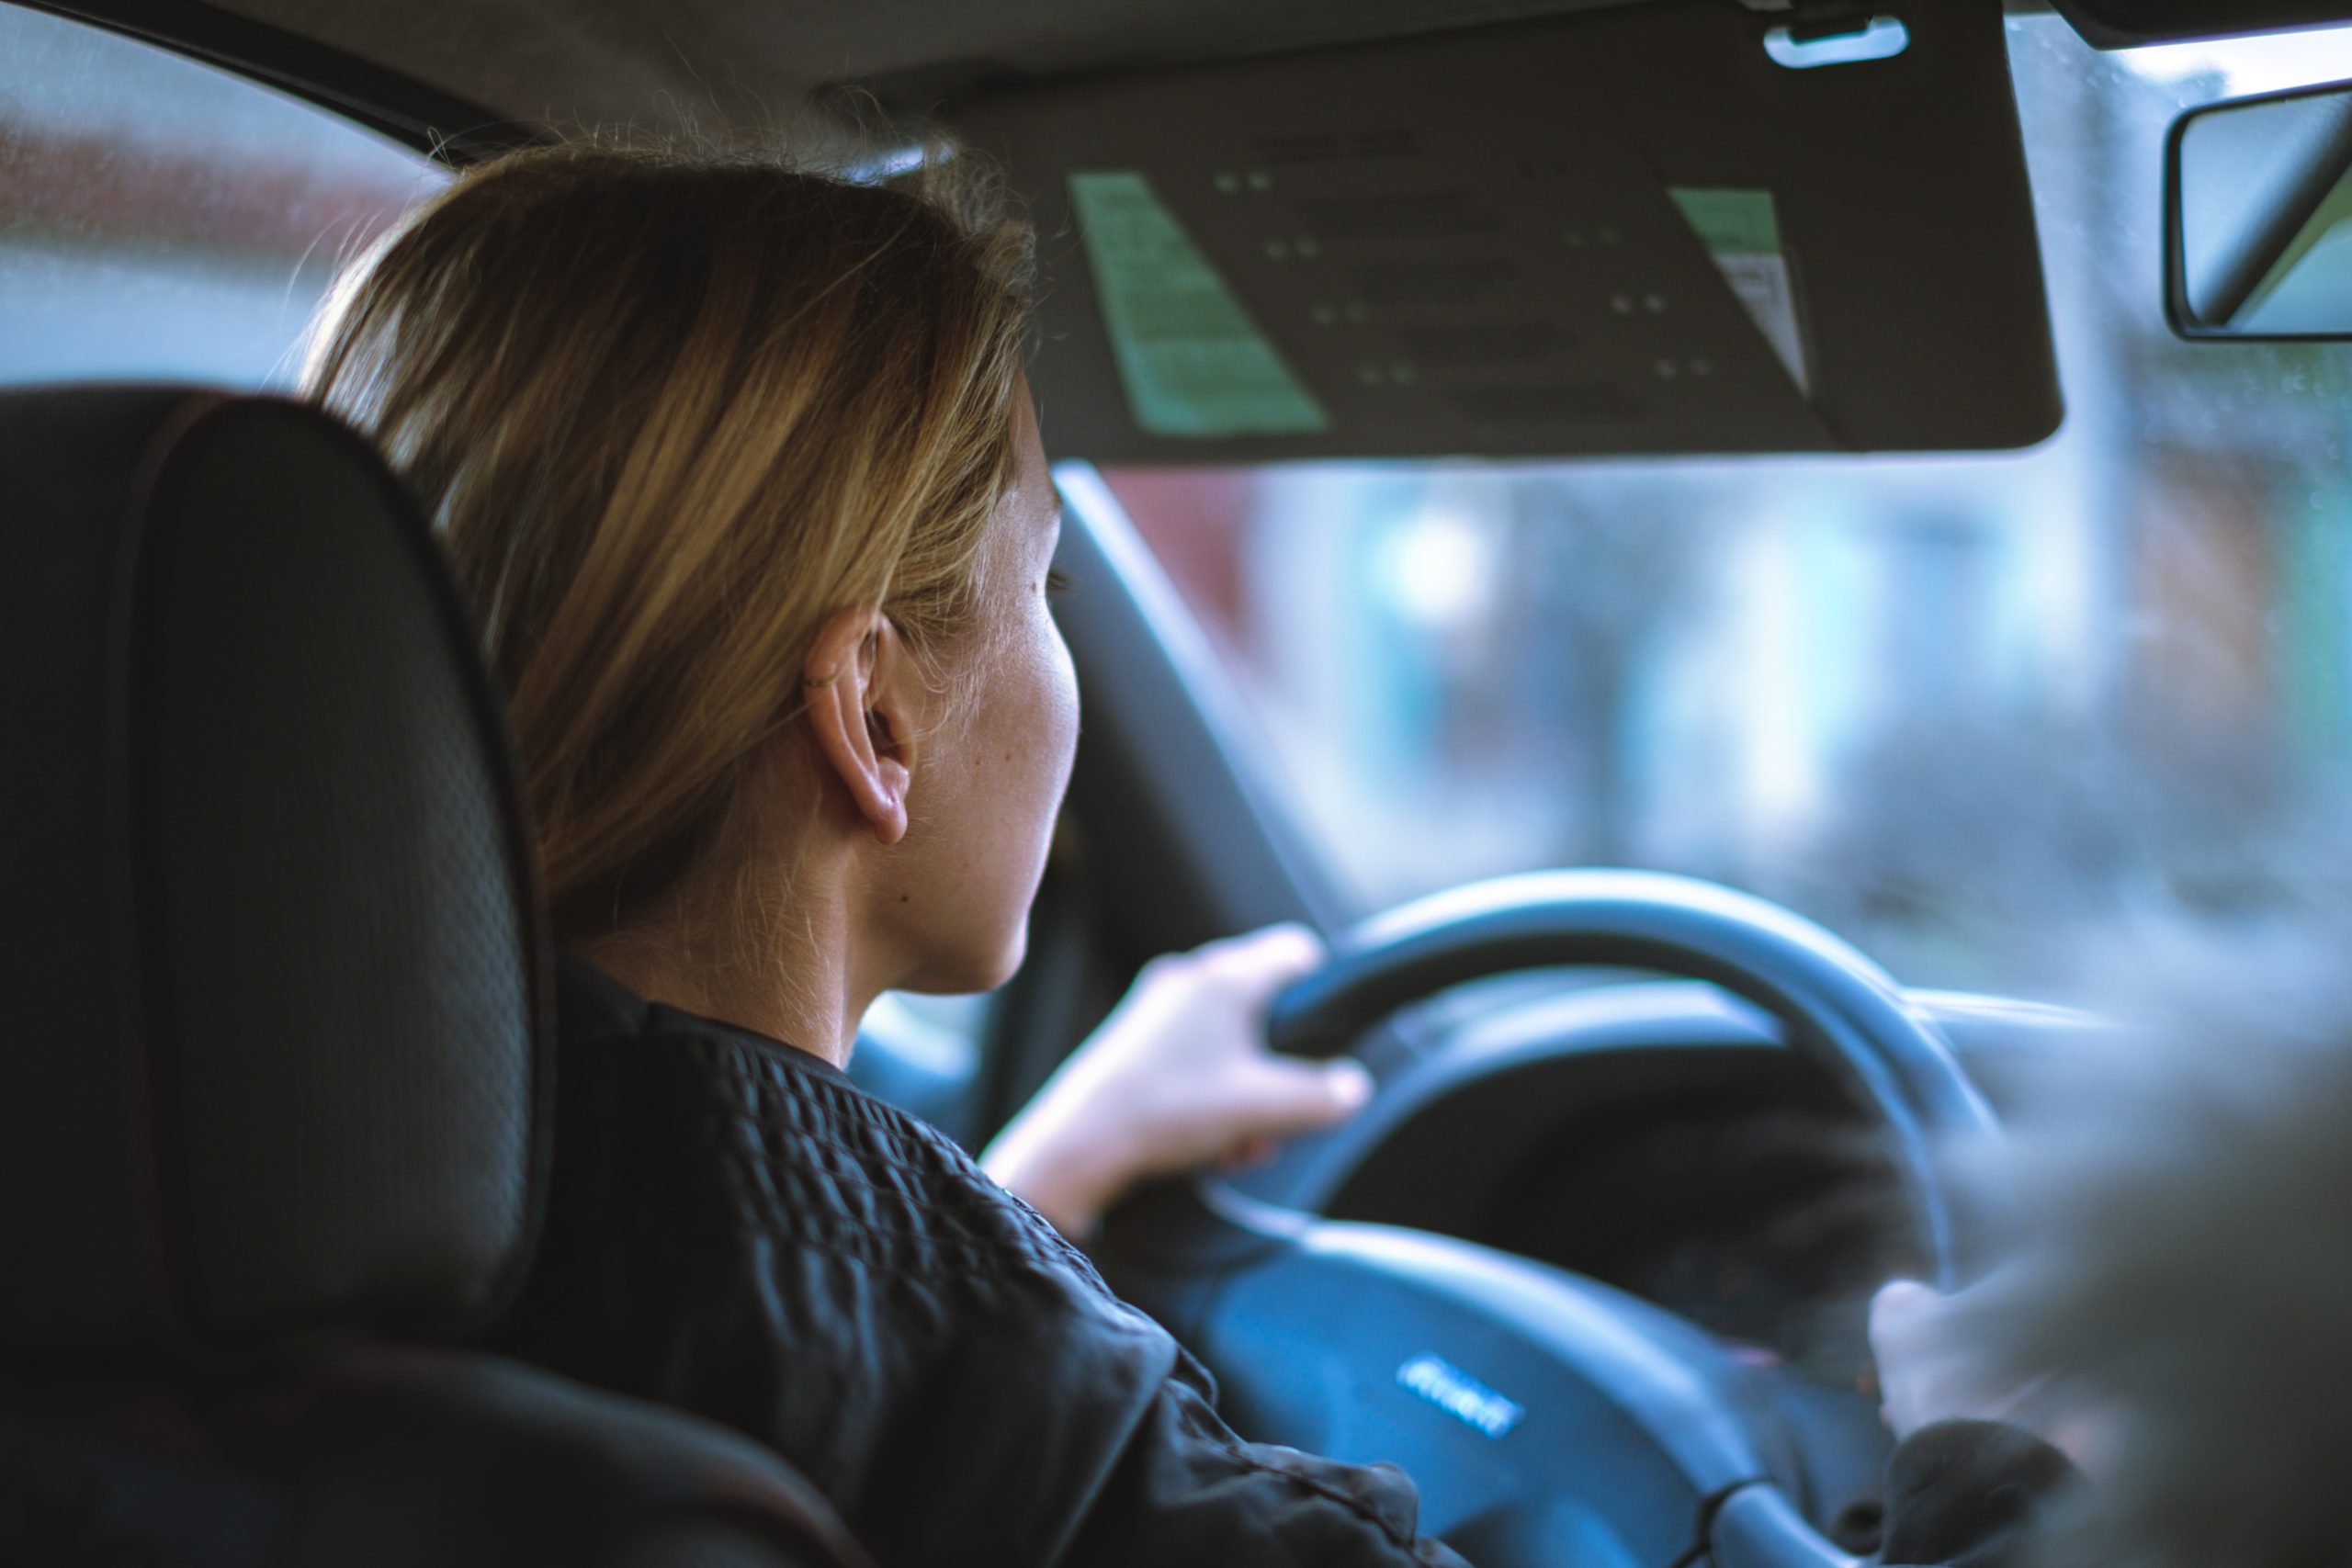 New Study Shows Teens with ADHD Have a Higher Risk of Car Accidents and Traffic Violations